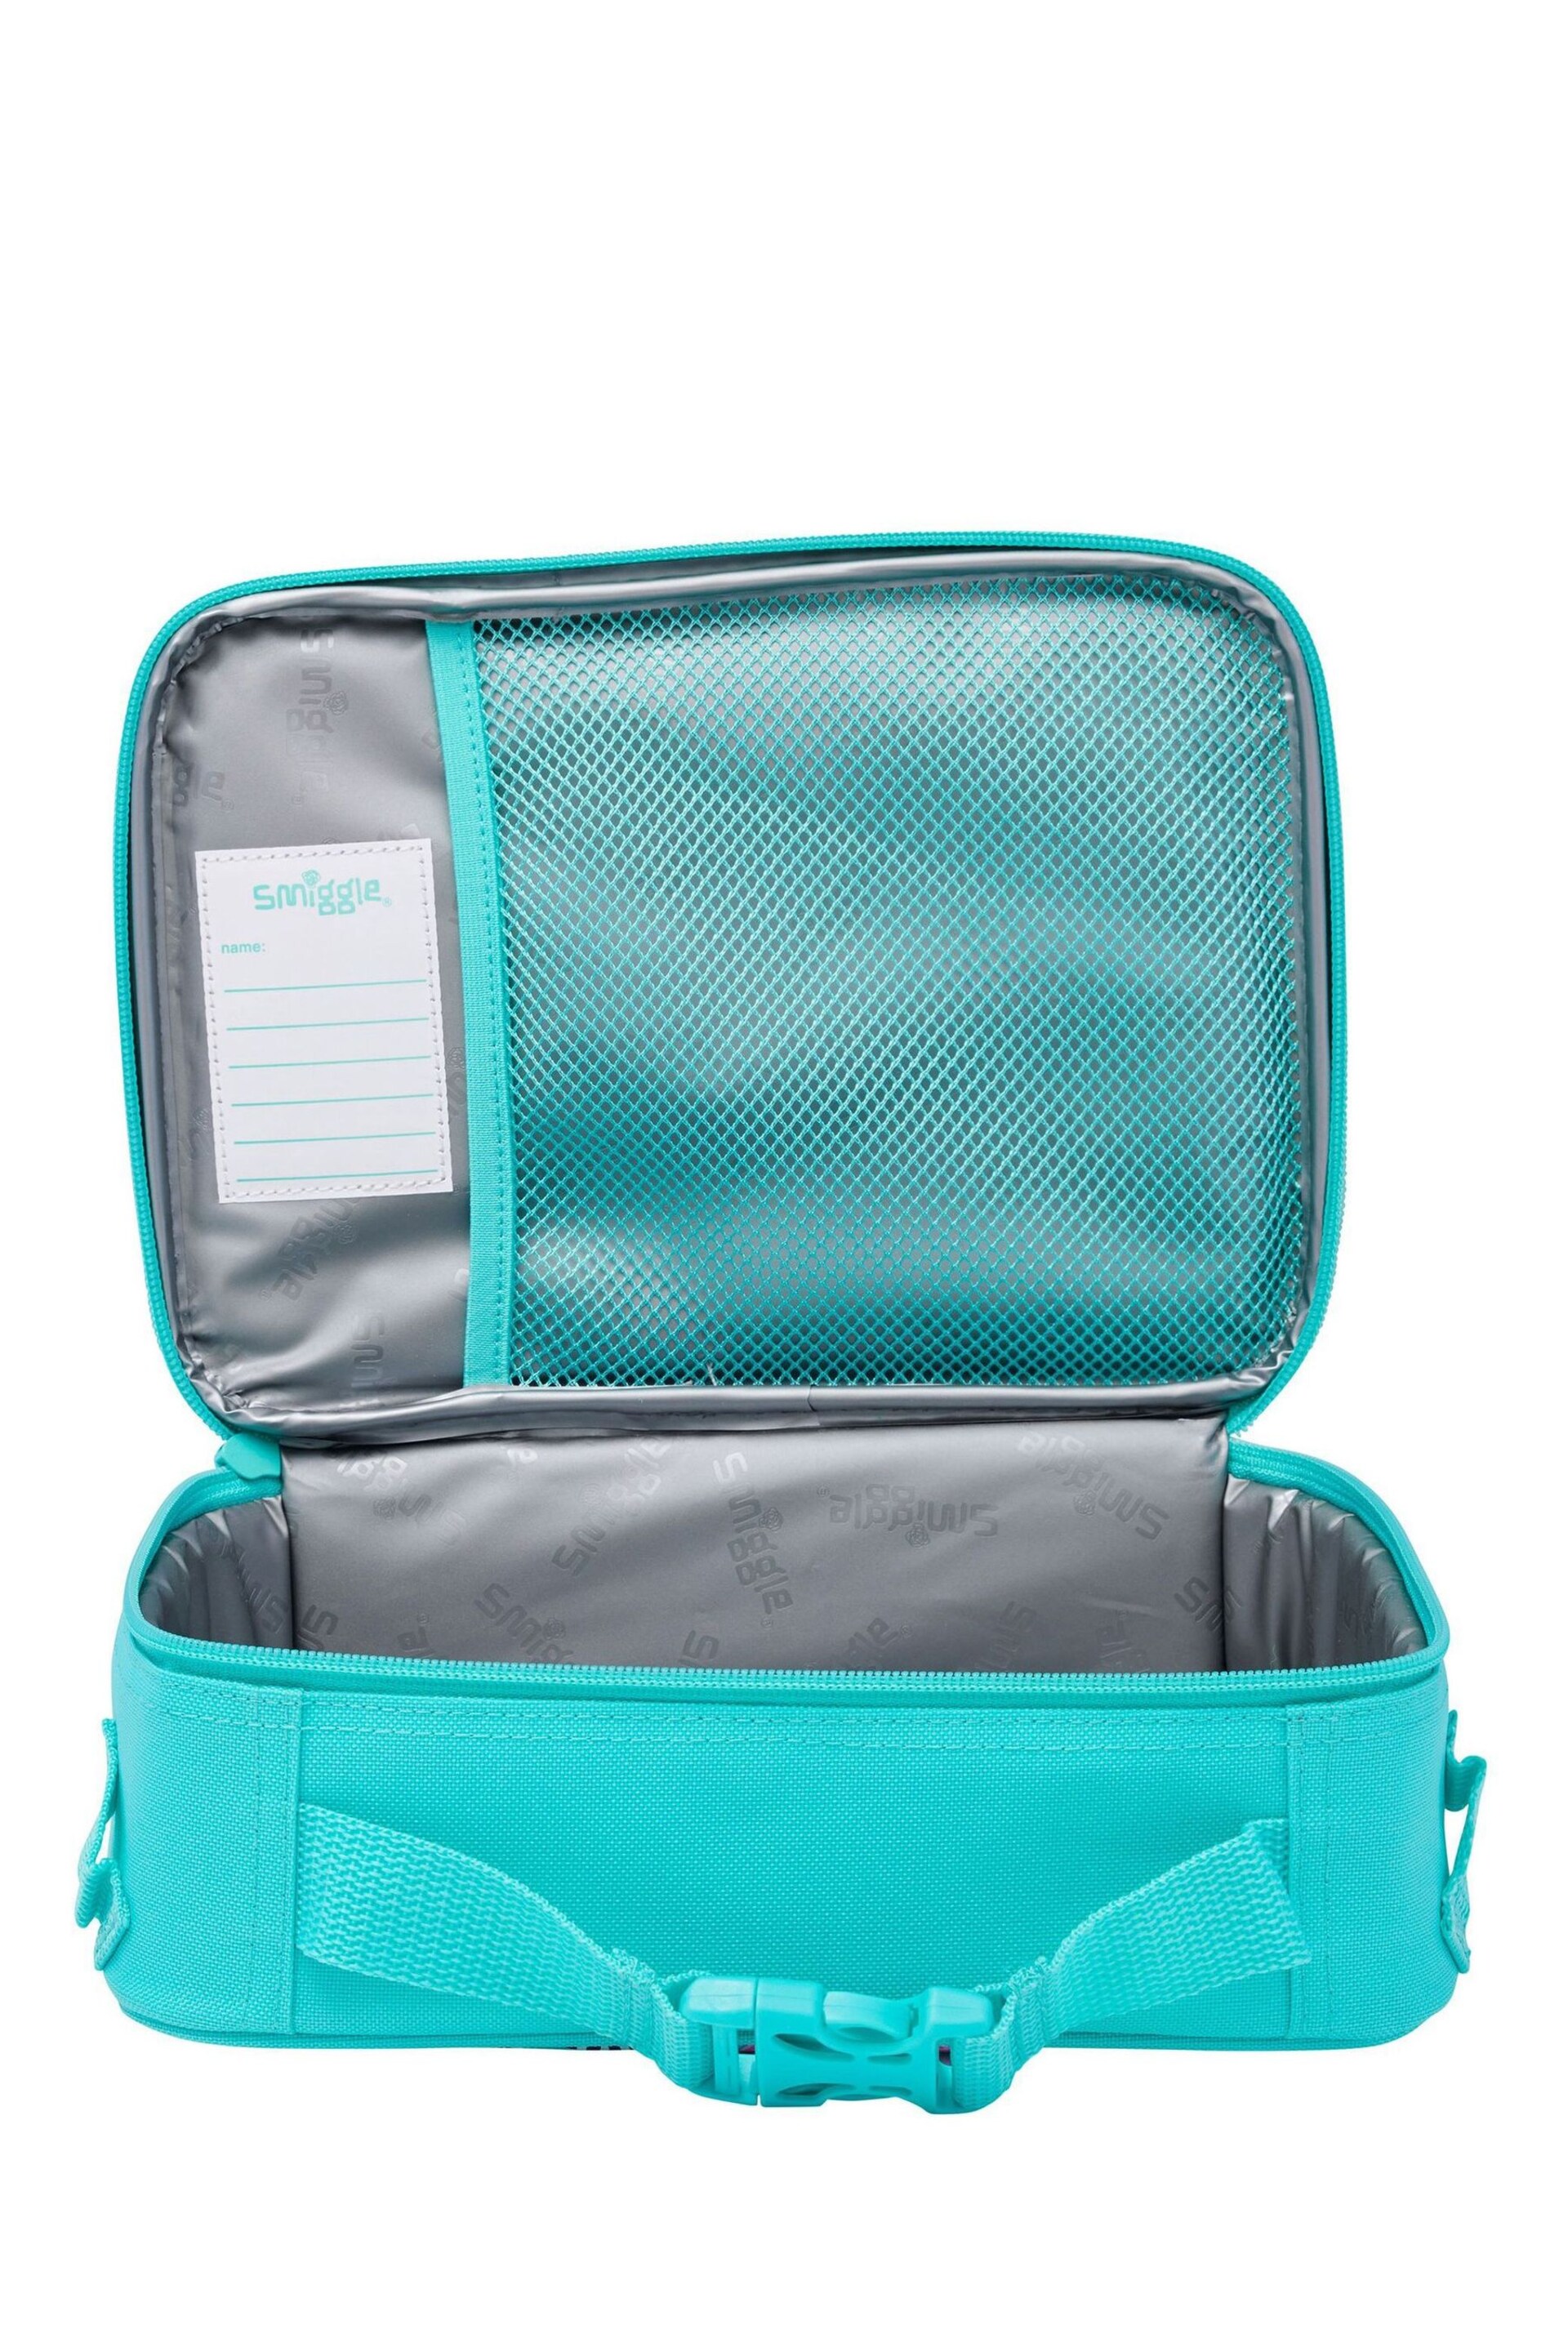 Smiggle Blue Wild Side Square Attach Id Lunch Box - Image 3 of 3